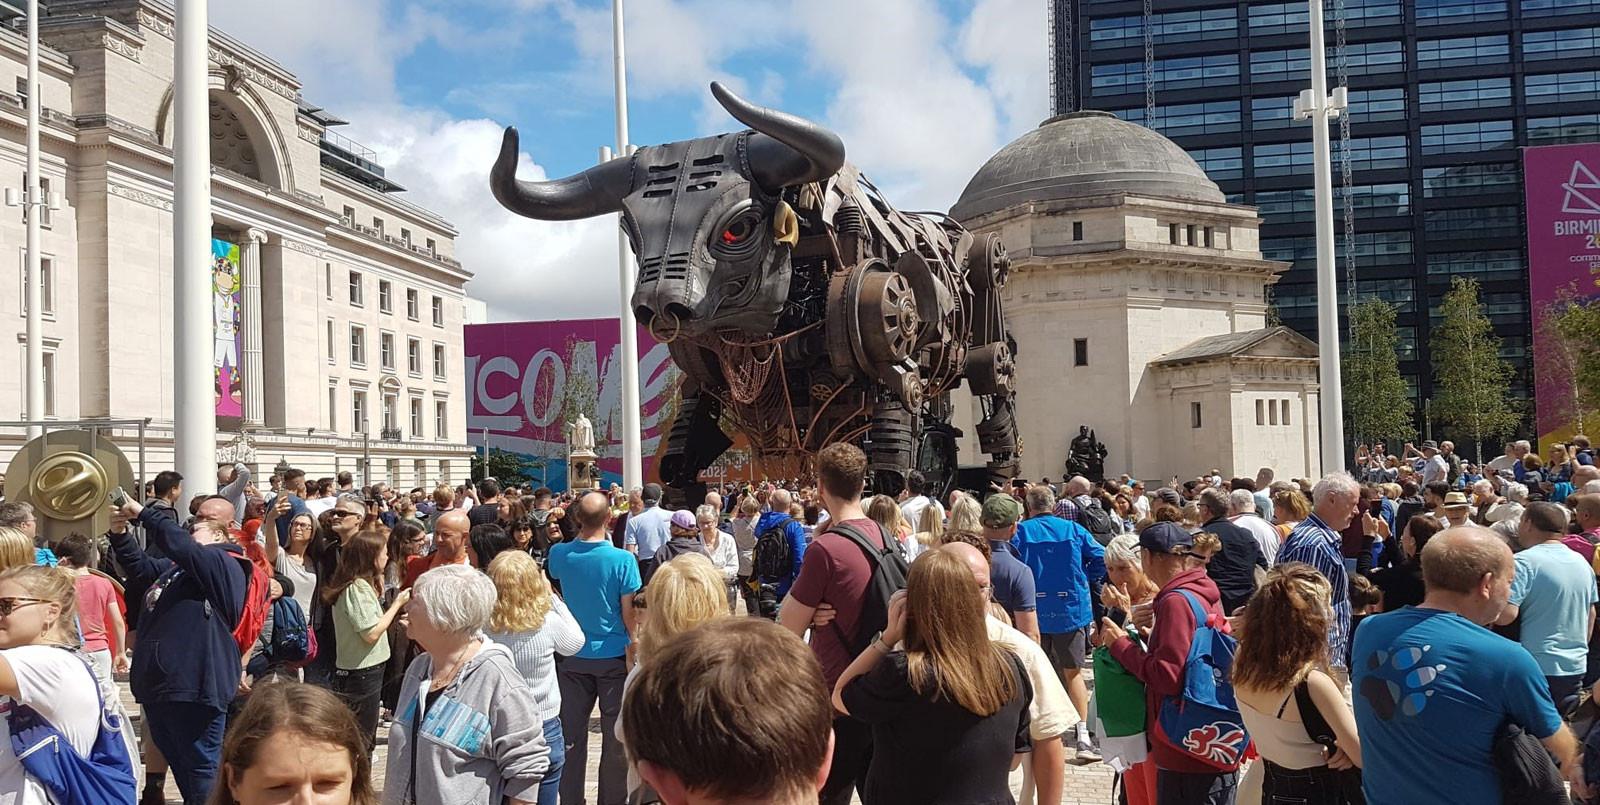 Ozzy the mechanical bull outside in Birmingham with a crowd surrounding taking photos